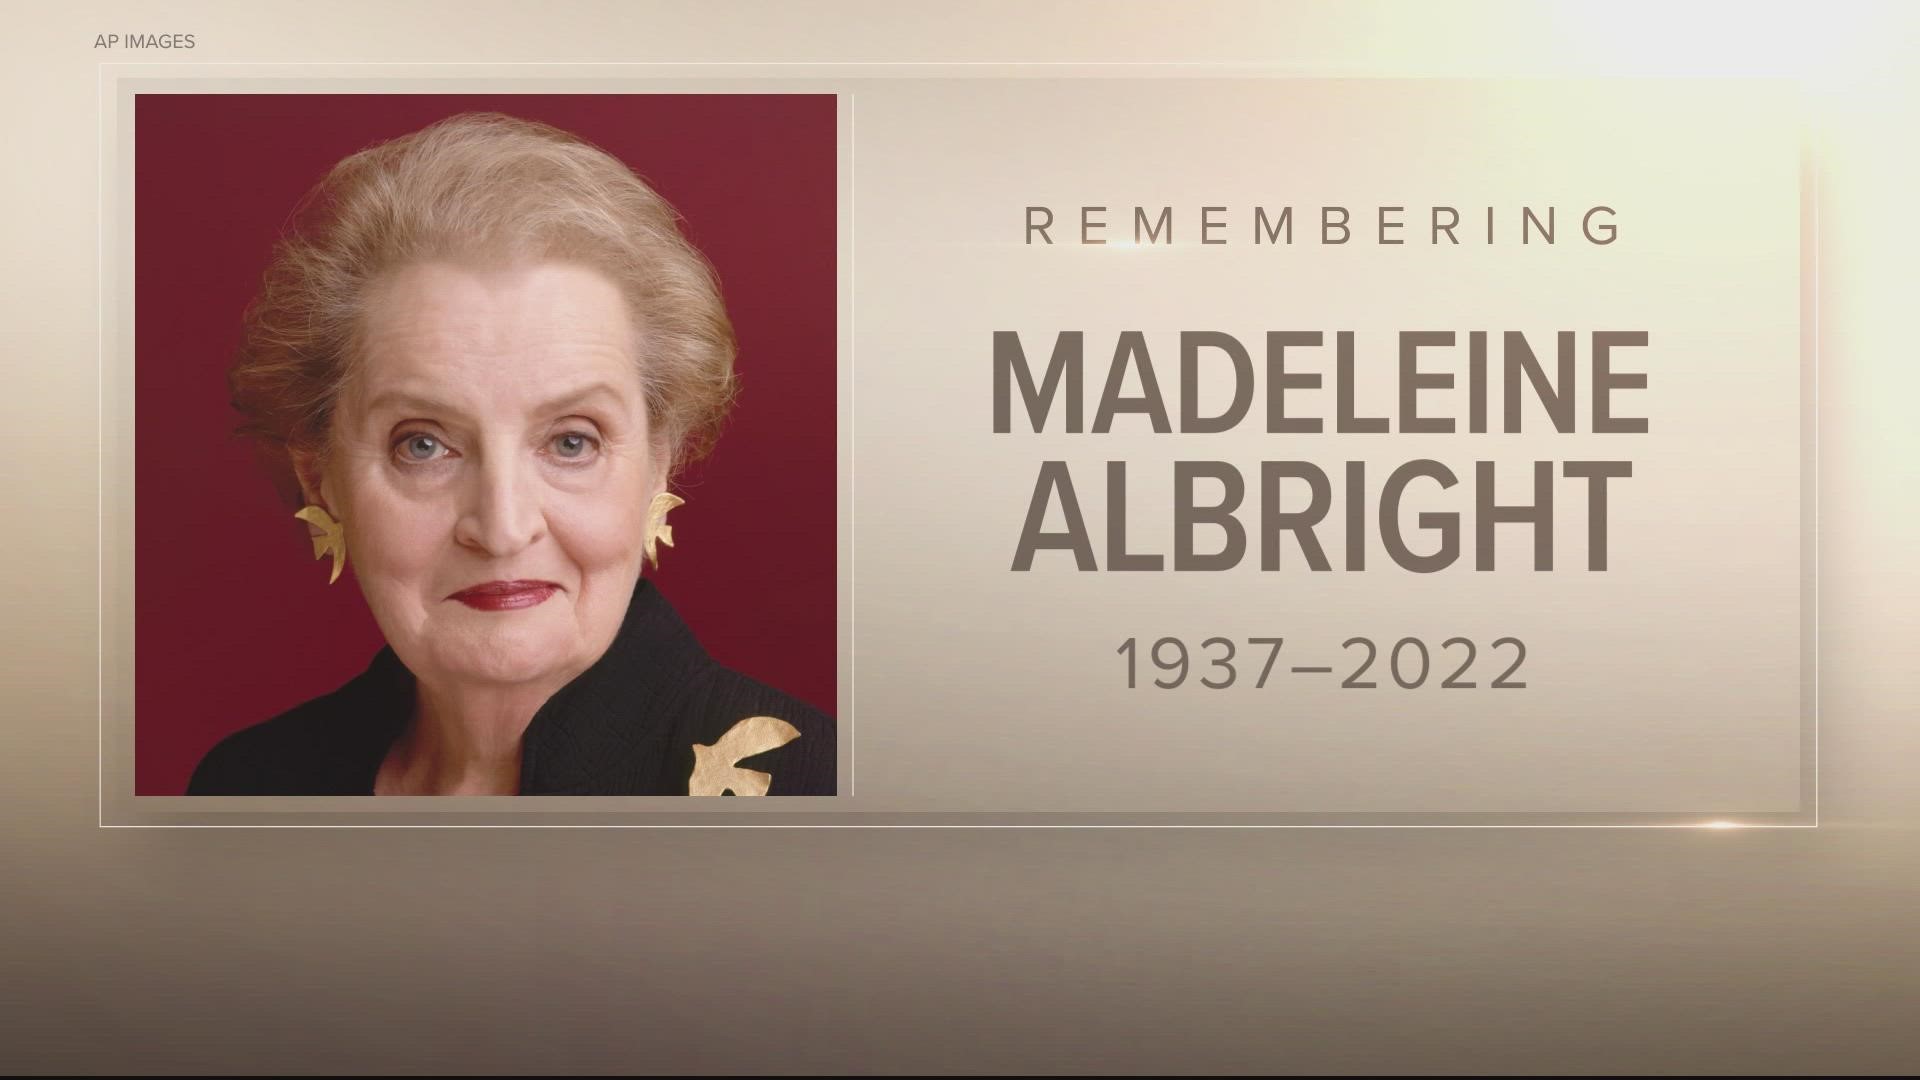 Dr. Richard D. Land on Madeleine Albright: An American to remember and cherish